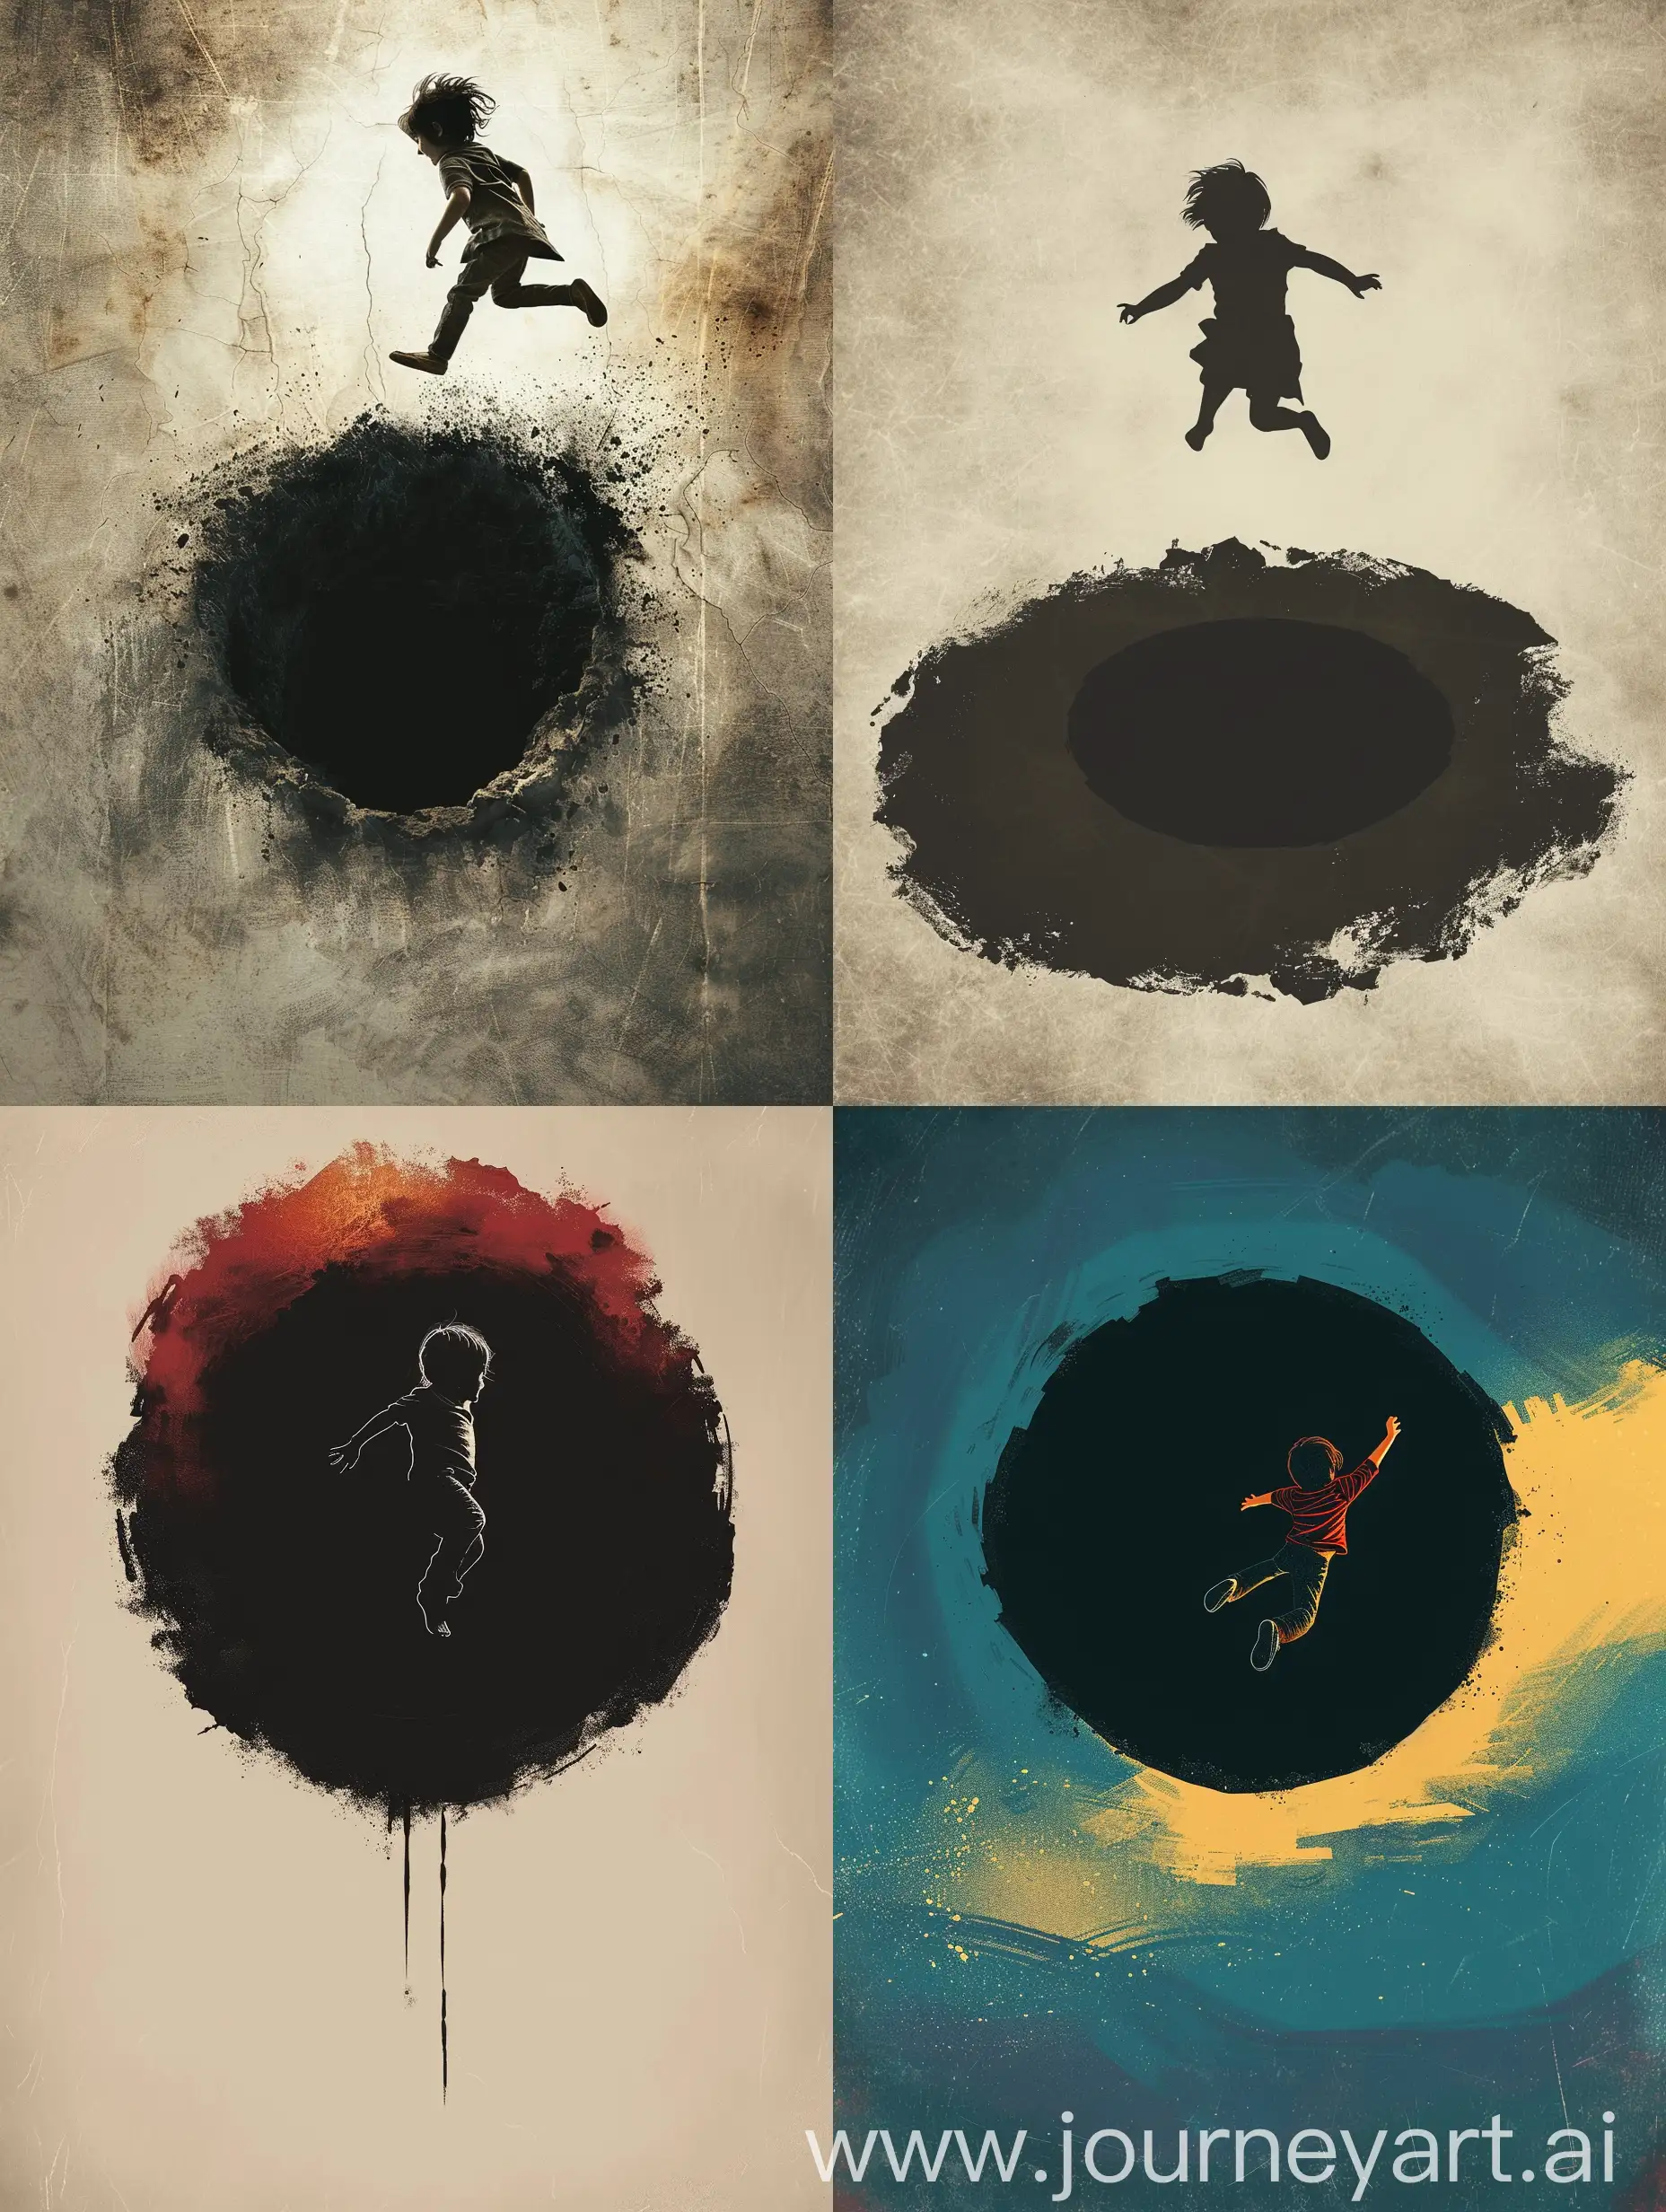 A CINEMA FESTIVAL POSTER. A CHILD JUMP OFF FROM A BLACK HOLE